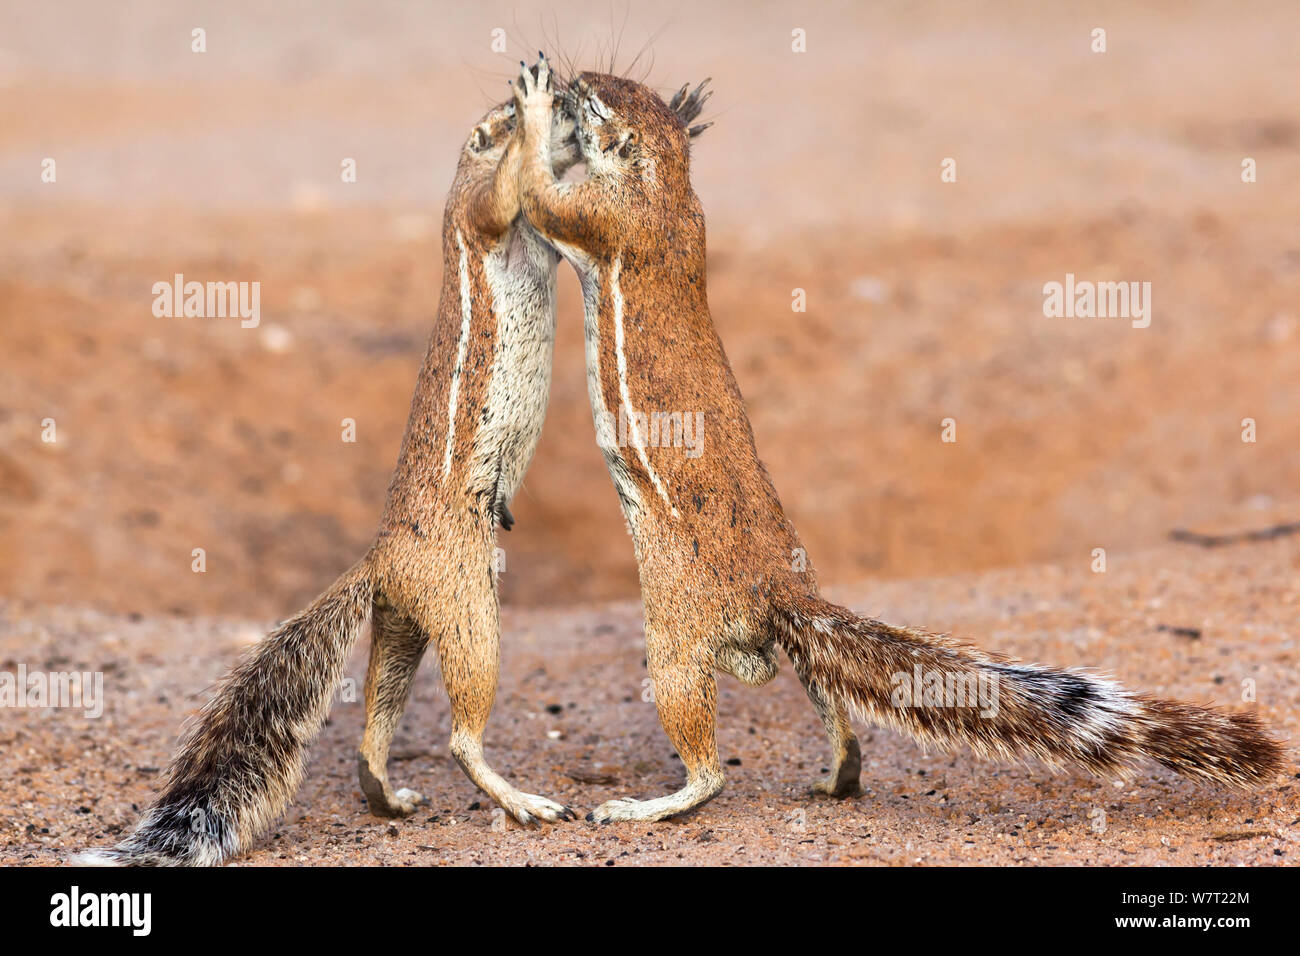 Male and female Ground squirrels (Xerus inauri)s interacting, Kgalagadi Transfrontier Park, Northern Cape, South Africa, February. Stock Photo